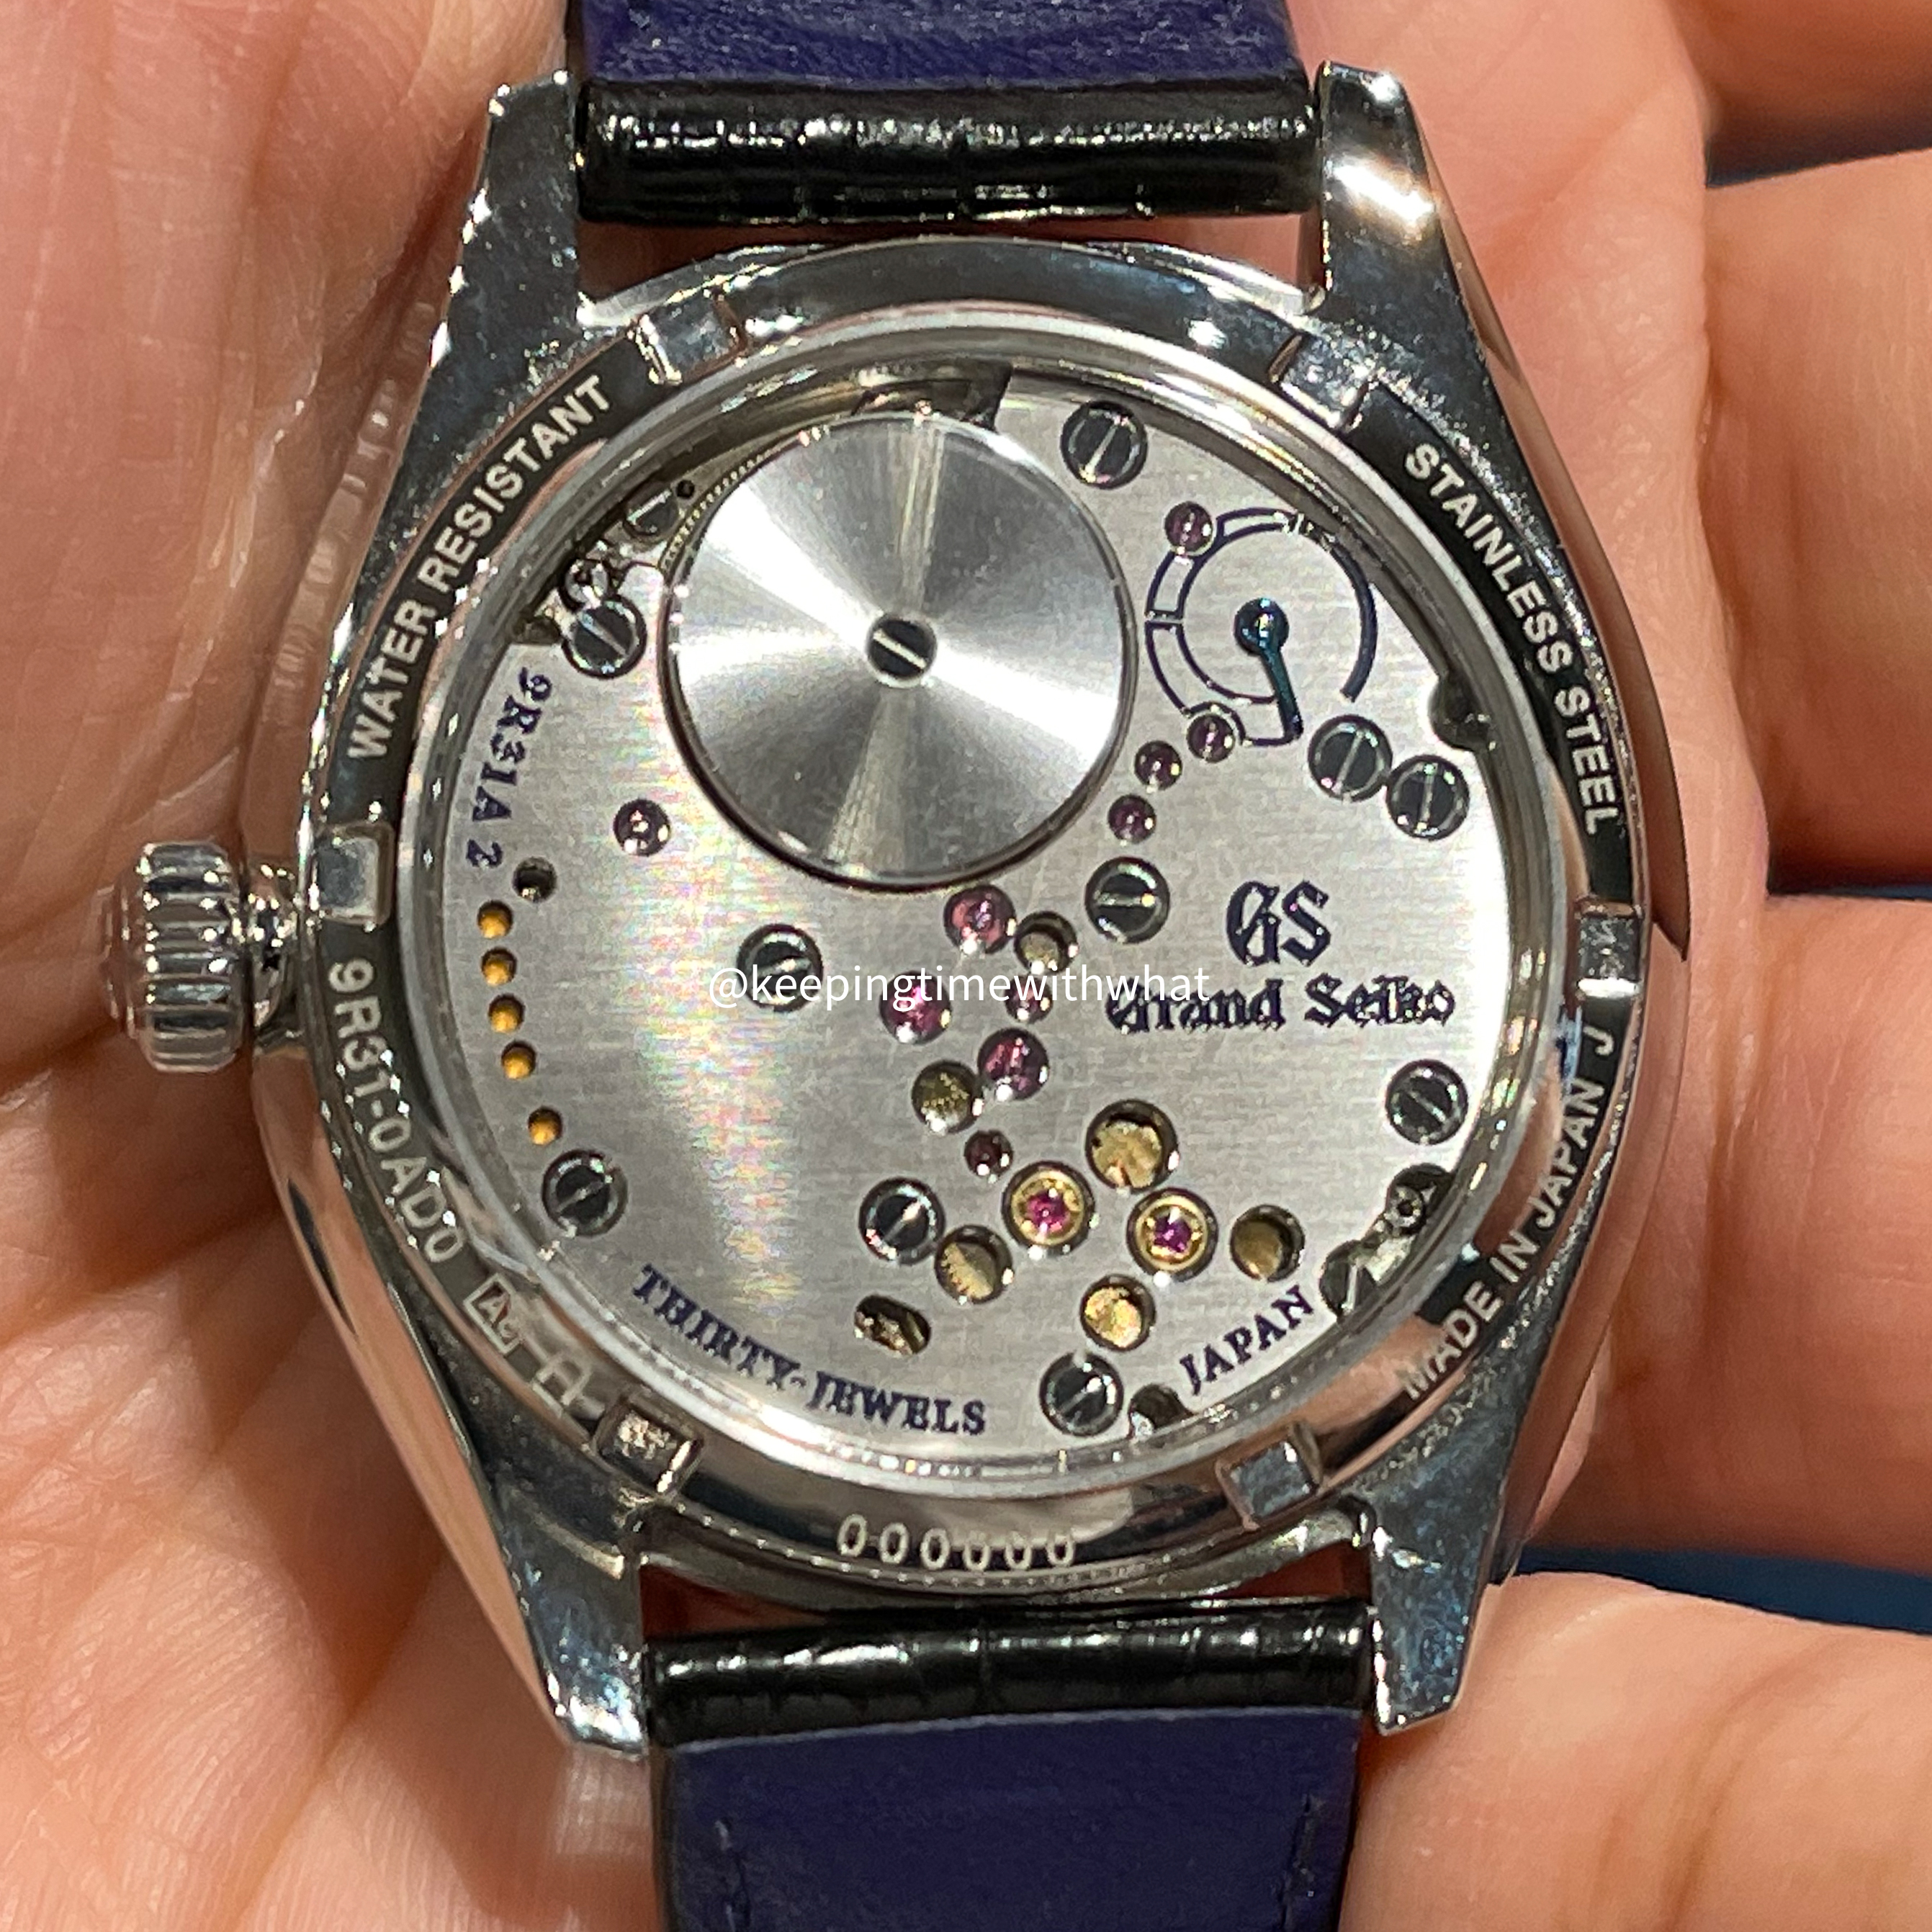 Grand Seiko SBGY007 - New Release | Omega Forums